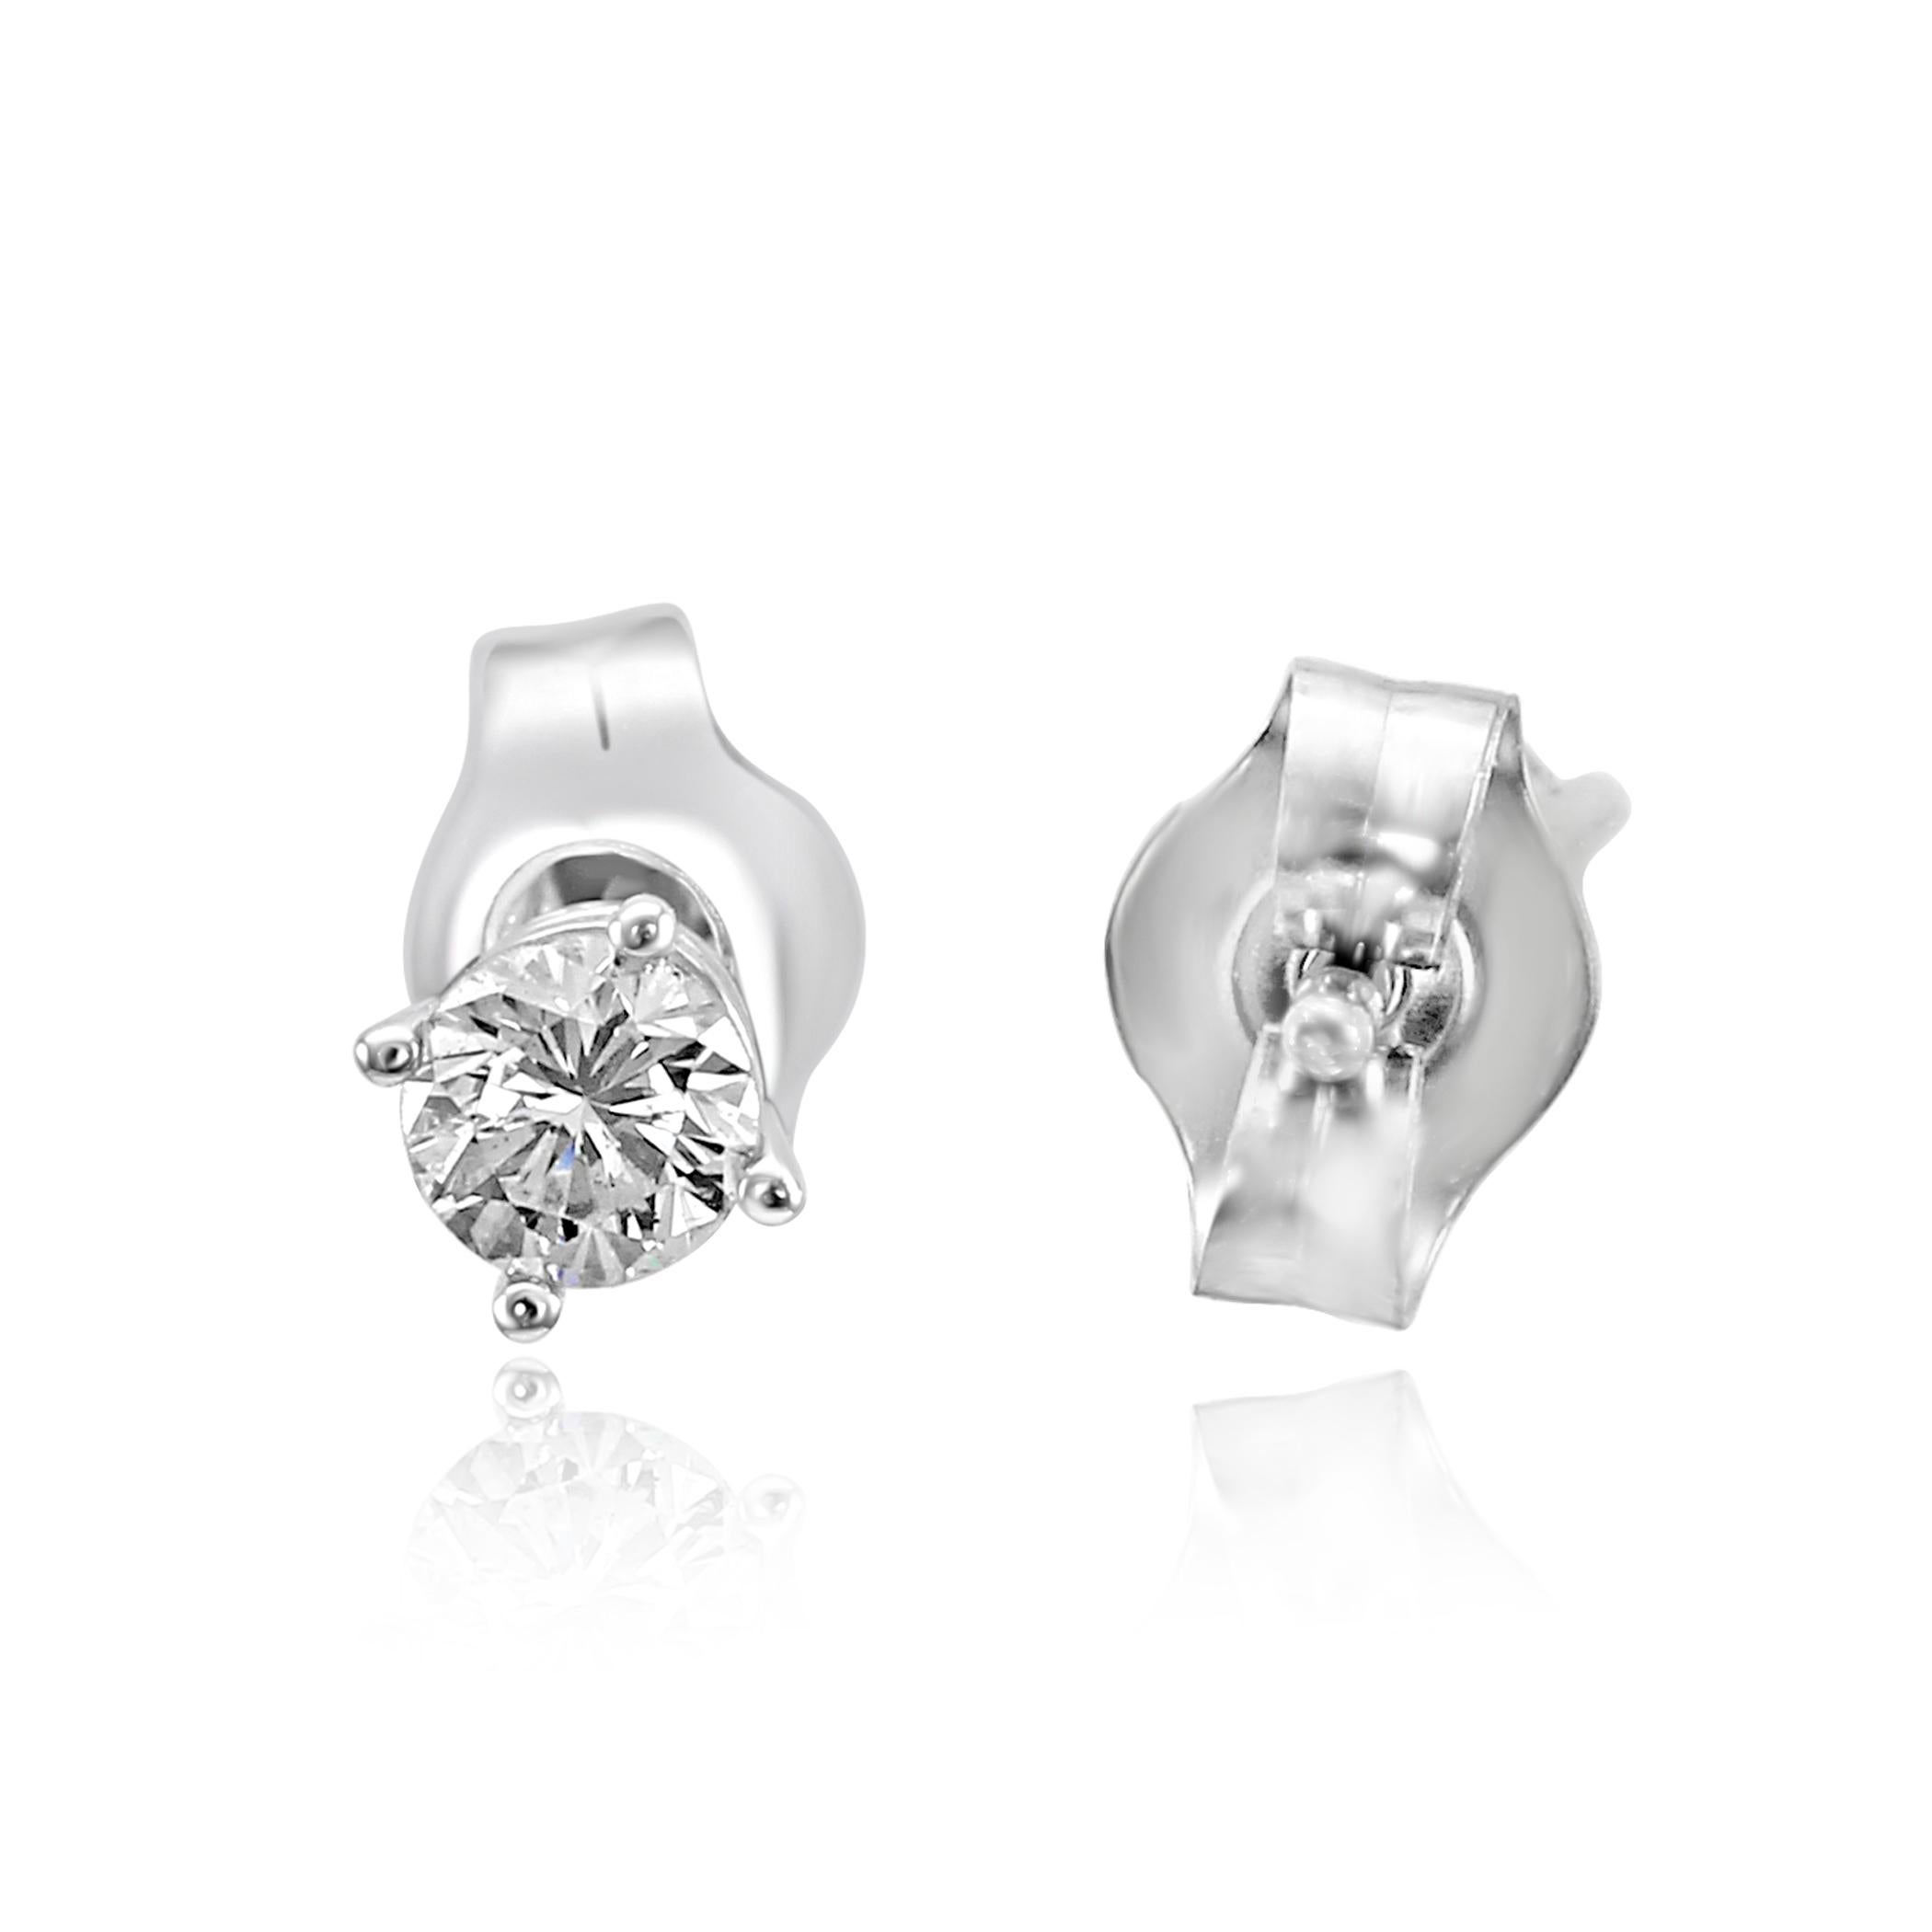 Round Cut 0.25 Carat Total Weight White Diamond Gold Push Back Stud Earrings